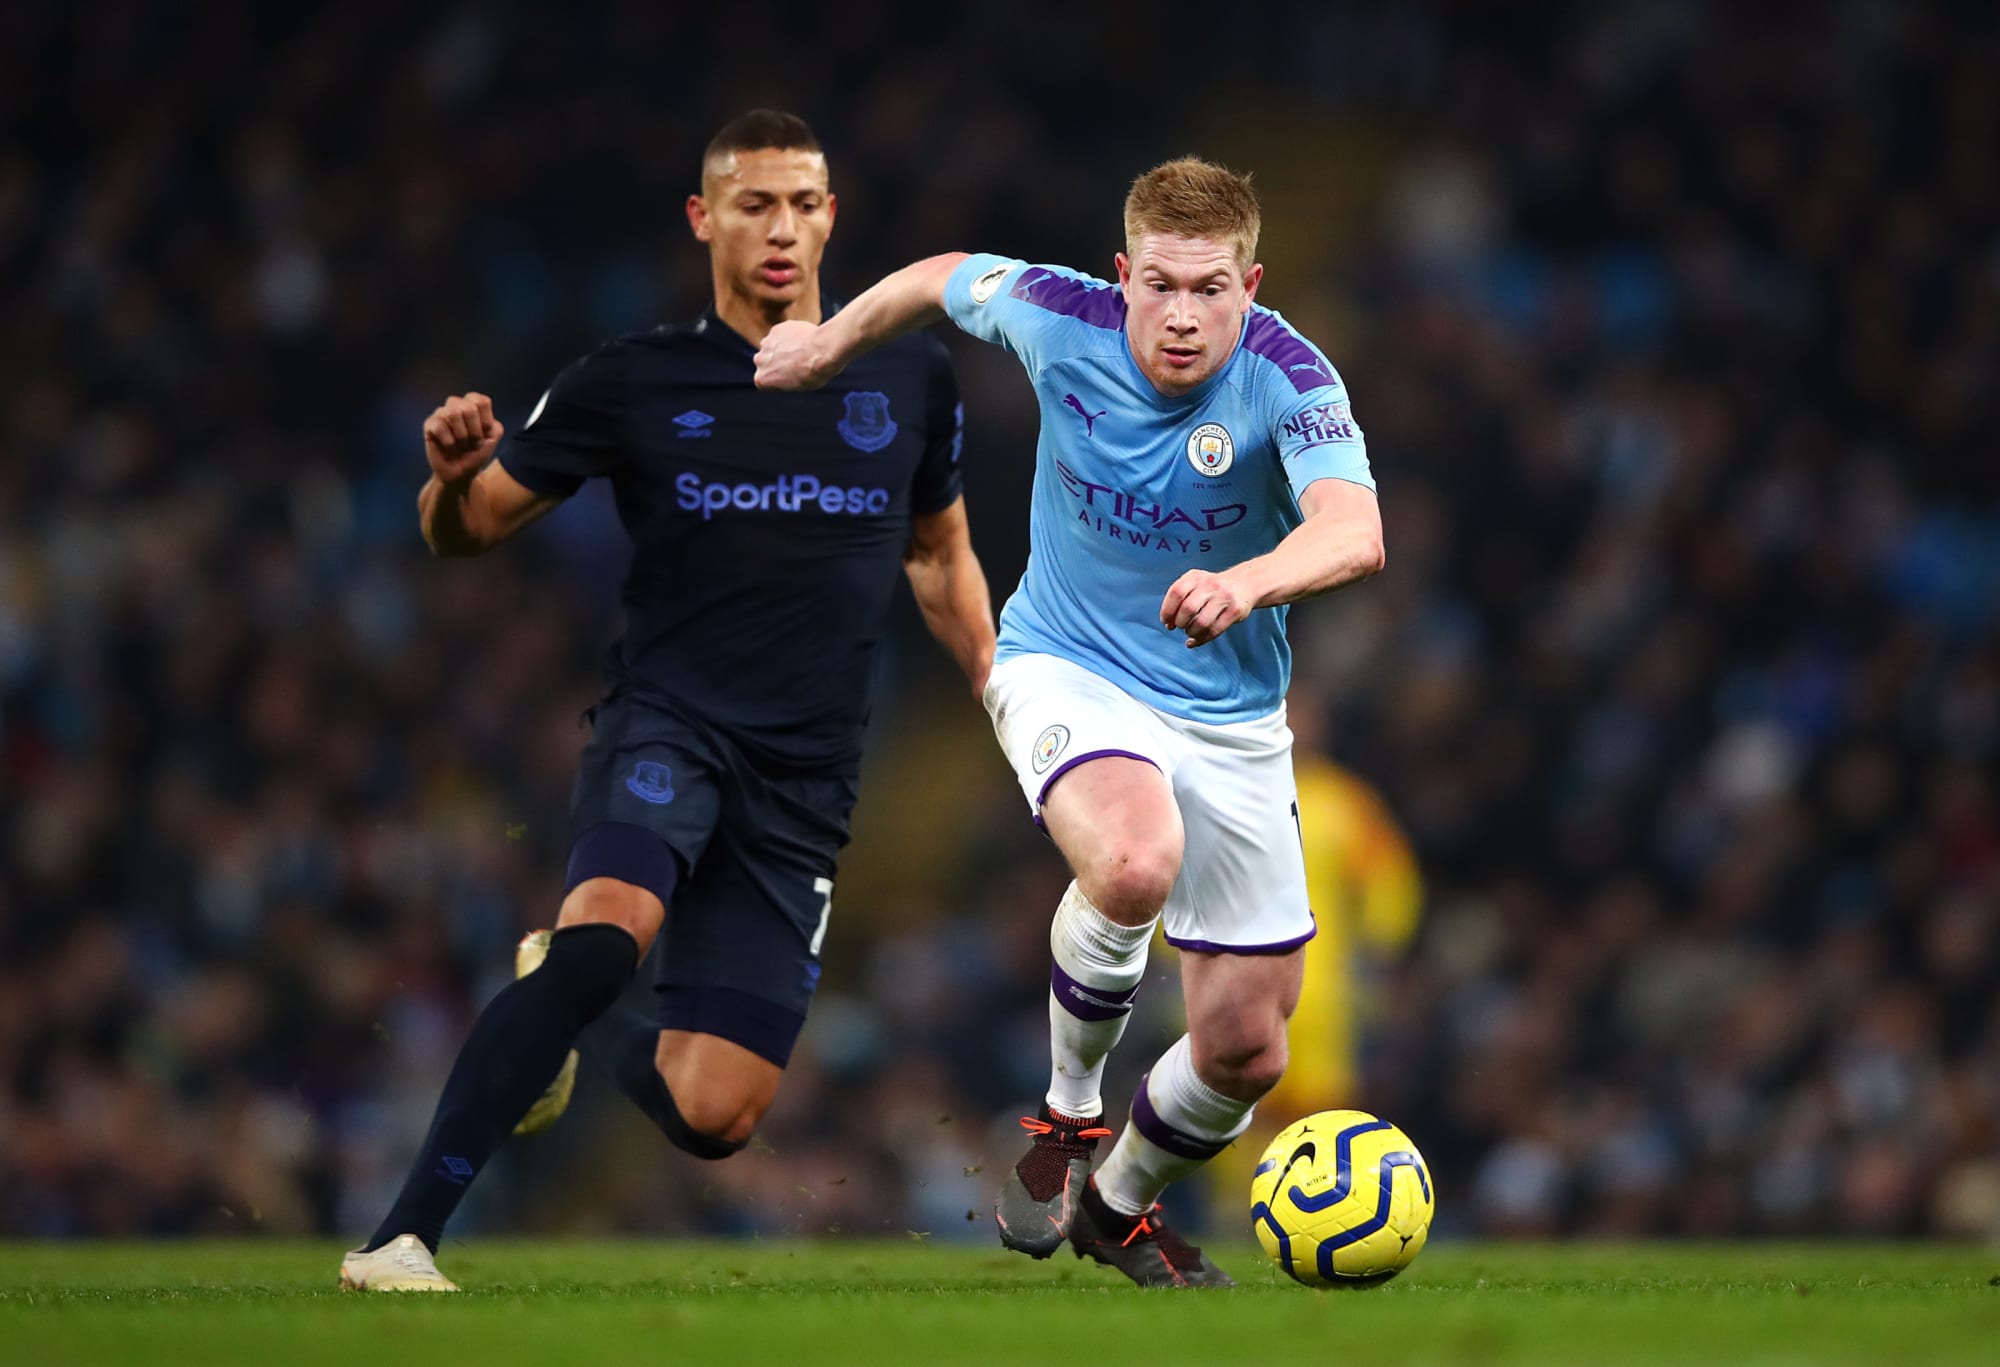 Vote Kevin de Bruyne as December PFA Player of the Month